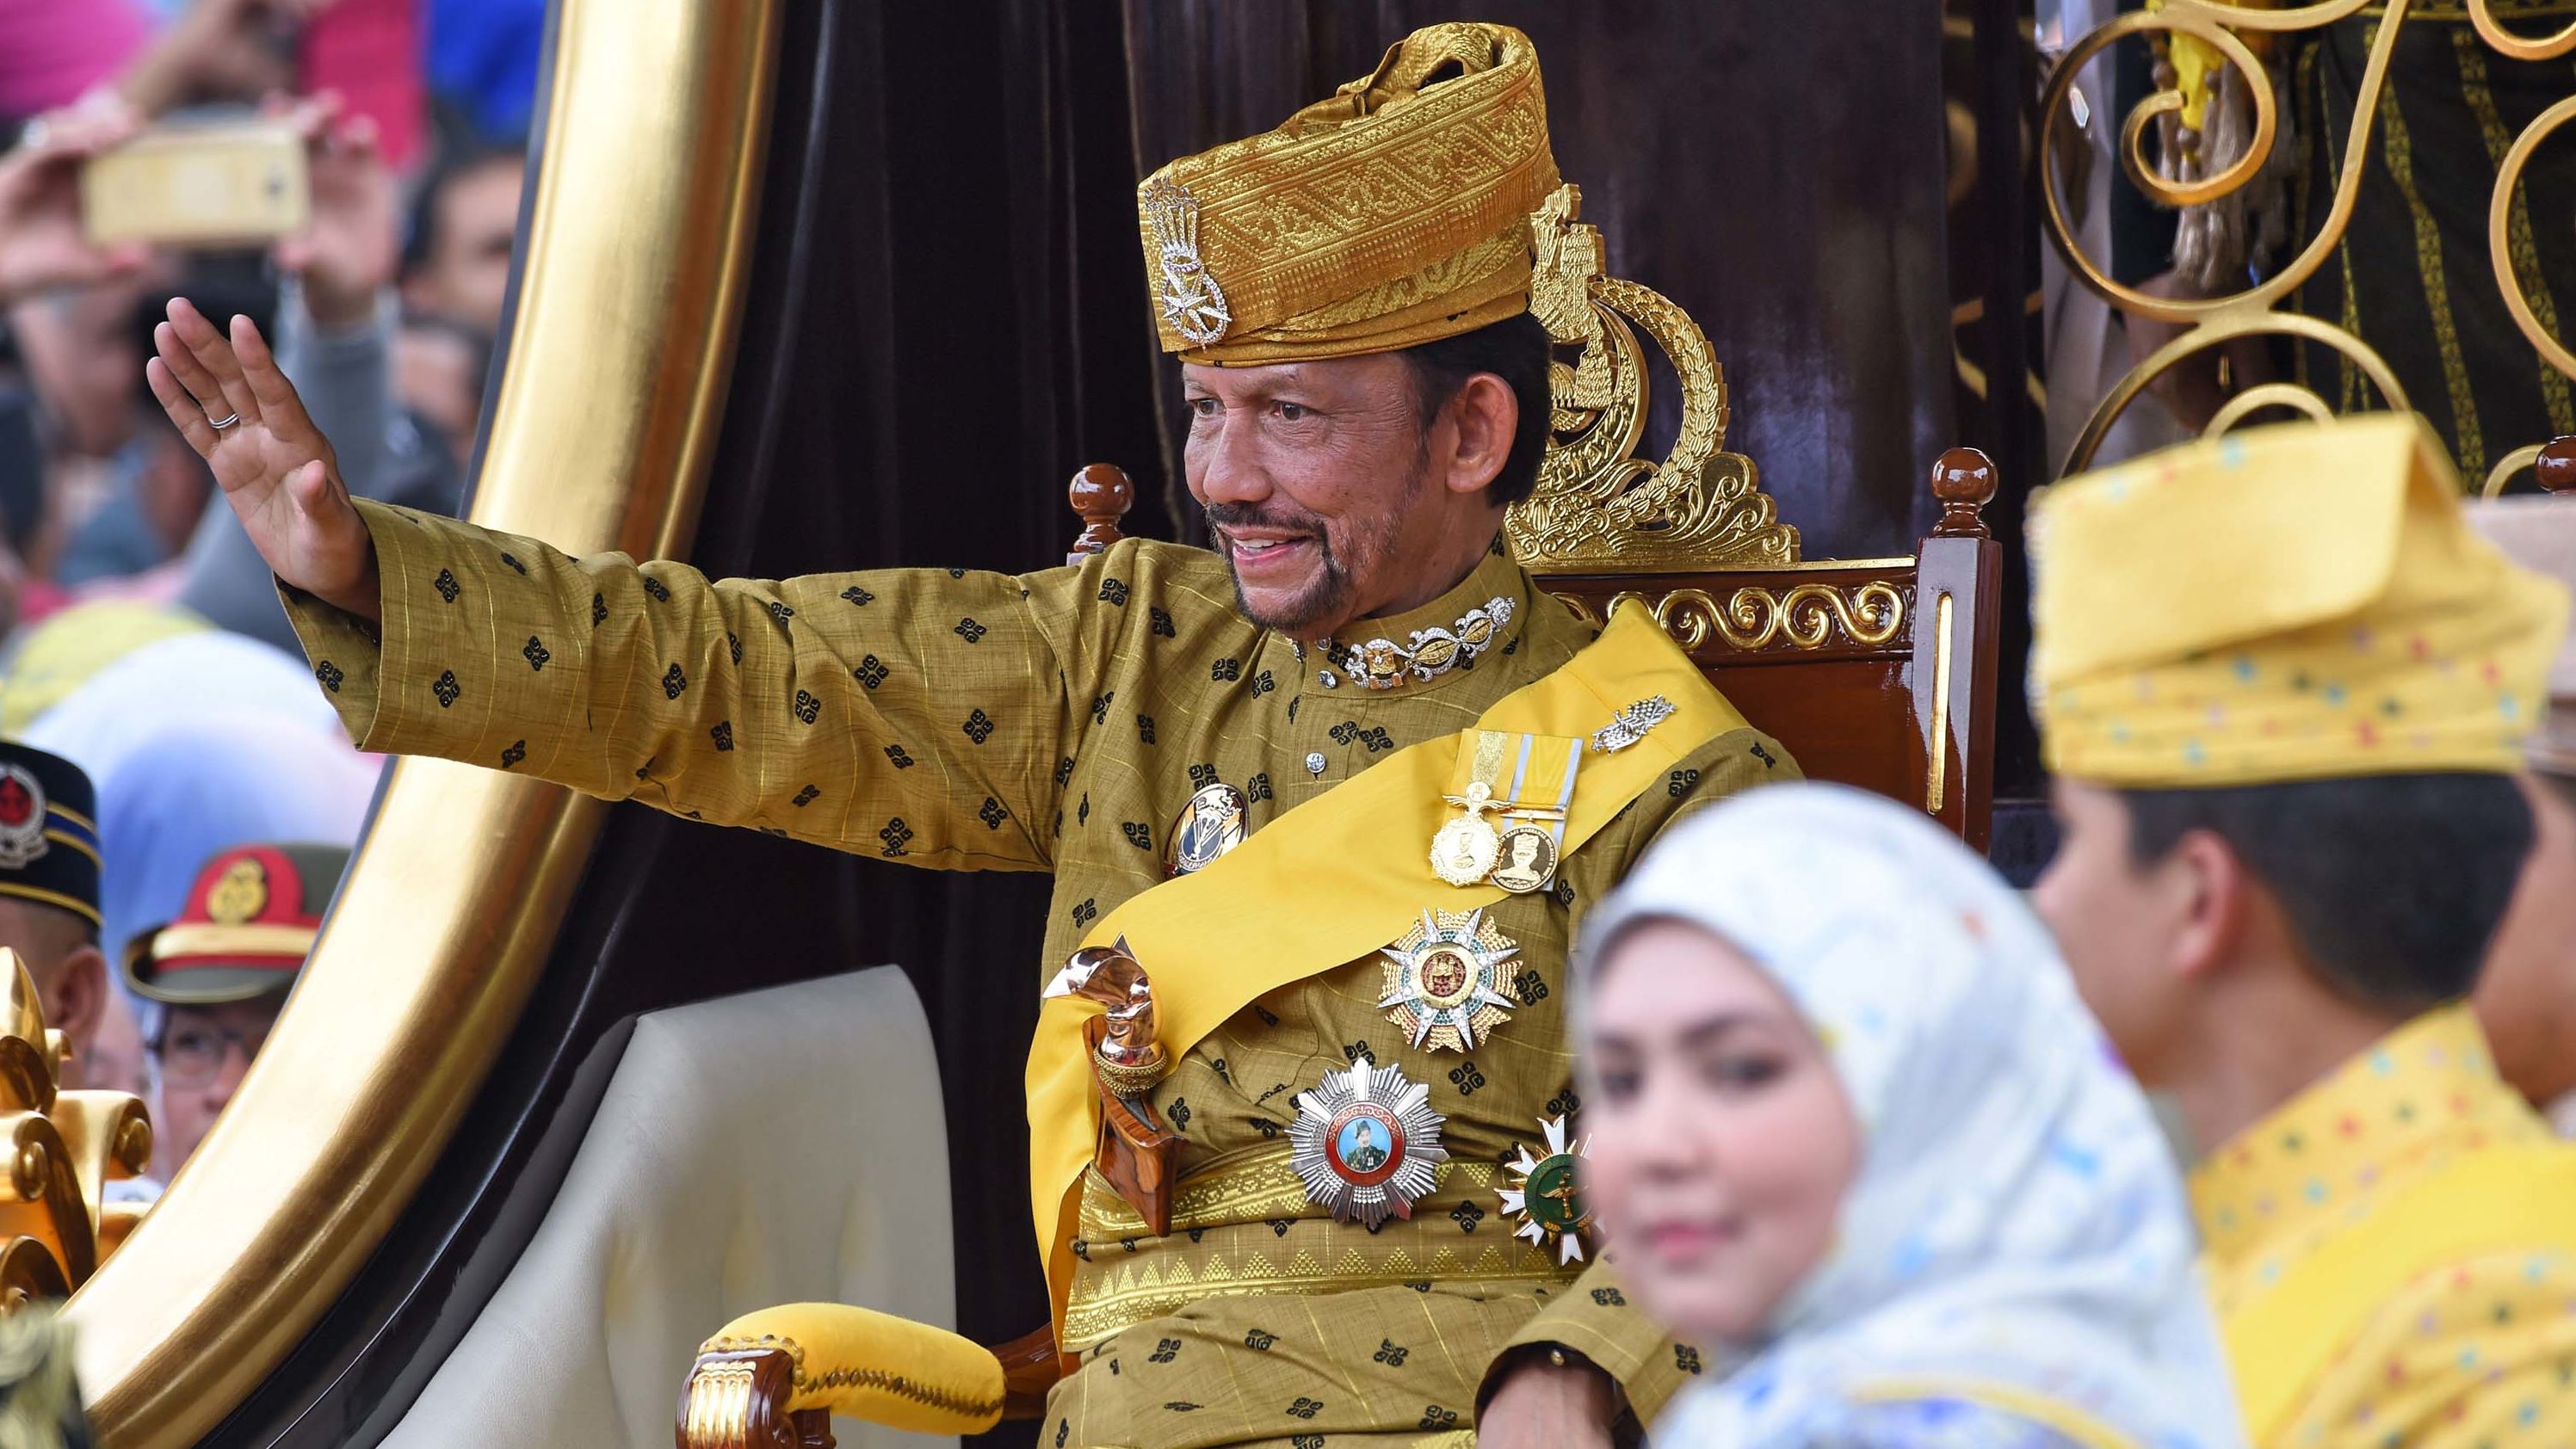 Brunei's Sultan Hassanal Bolkiah waves from the royal chariot during his golden jubilee procession 